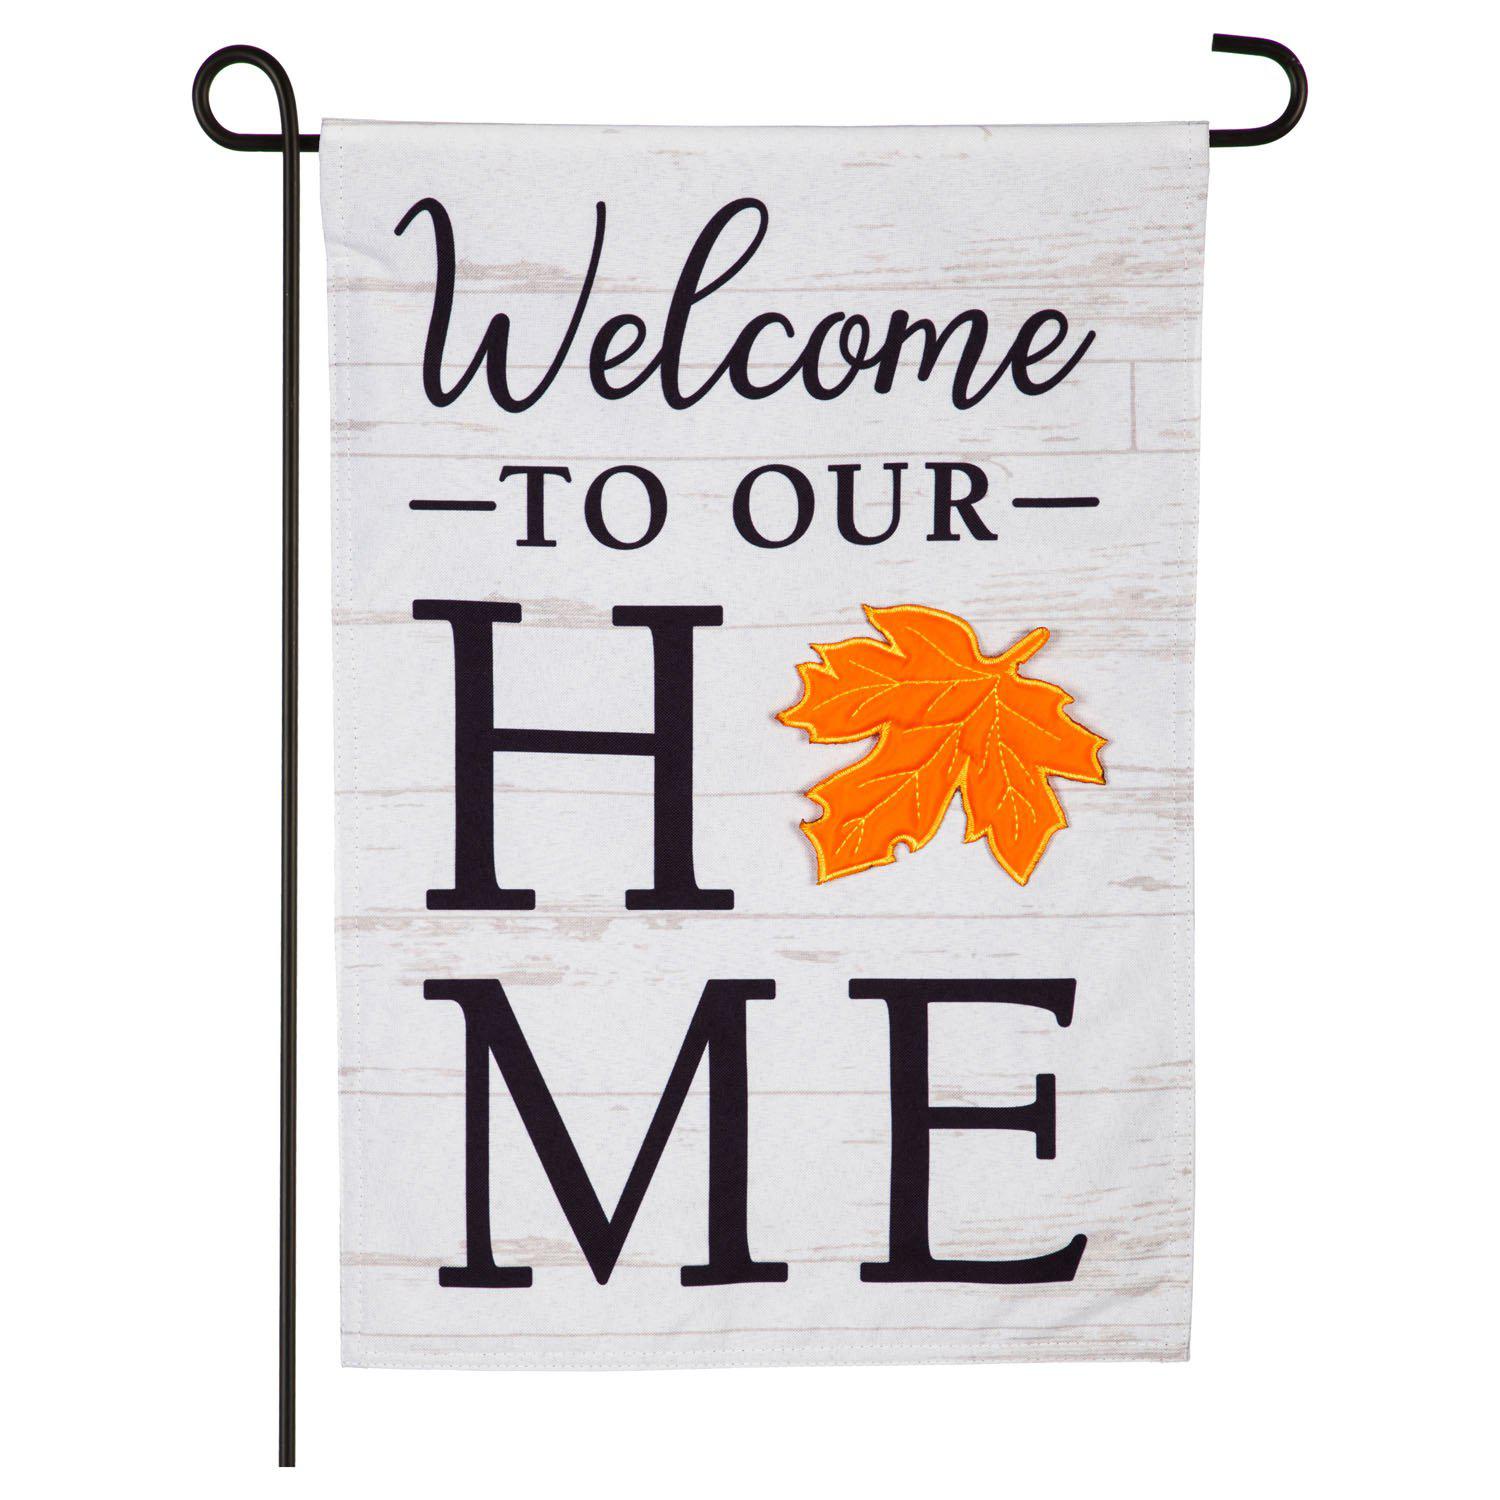 Welcome to Our Home Interchangeable Garden Flag with autumn leaf